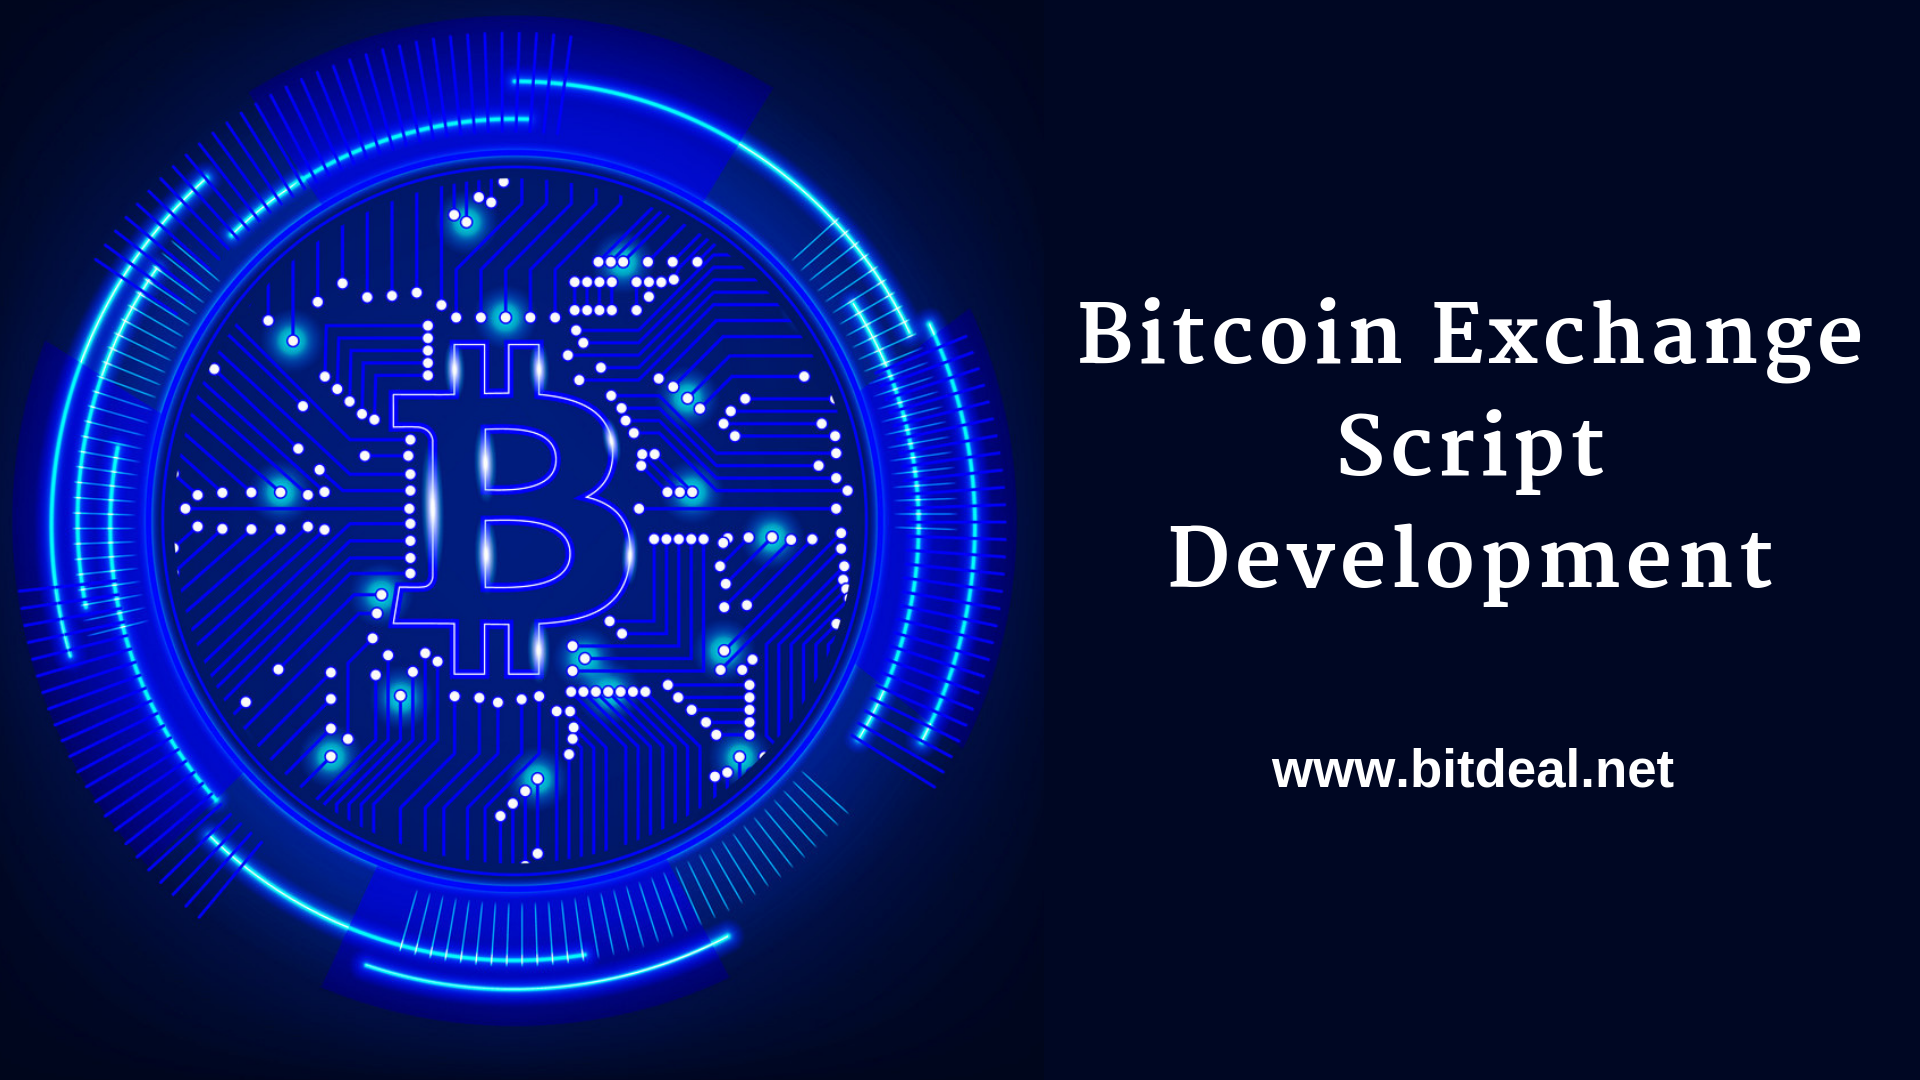 Bitcoin exchange website to start your own businessServicesBusiness OffersAll Indiaother